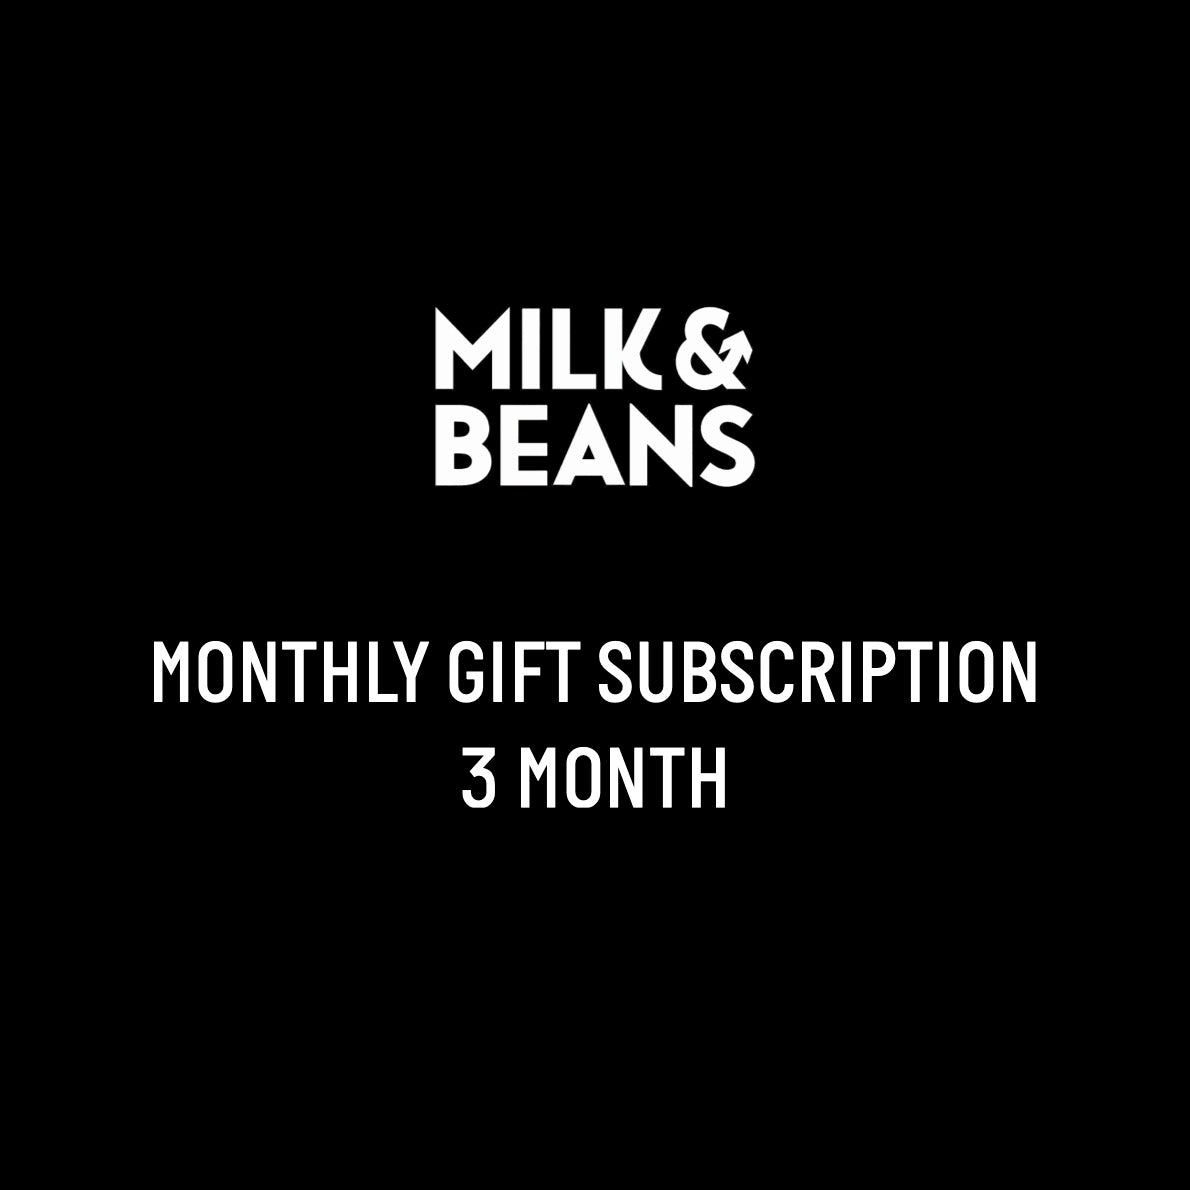 Monthly Gift Subscription - 3 Months